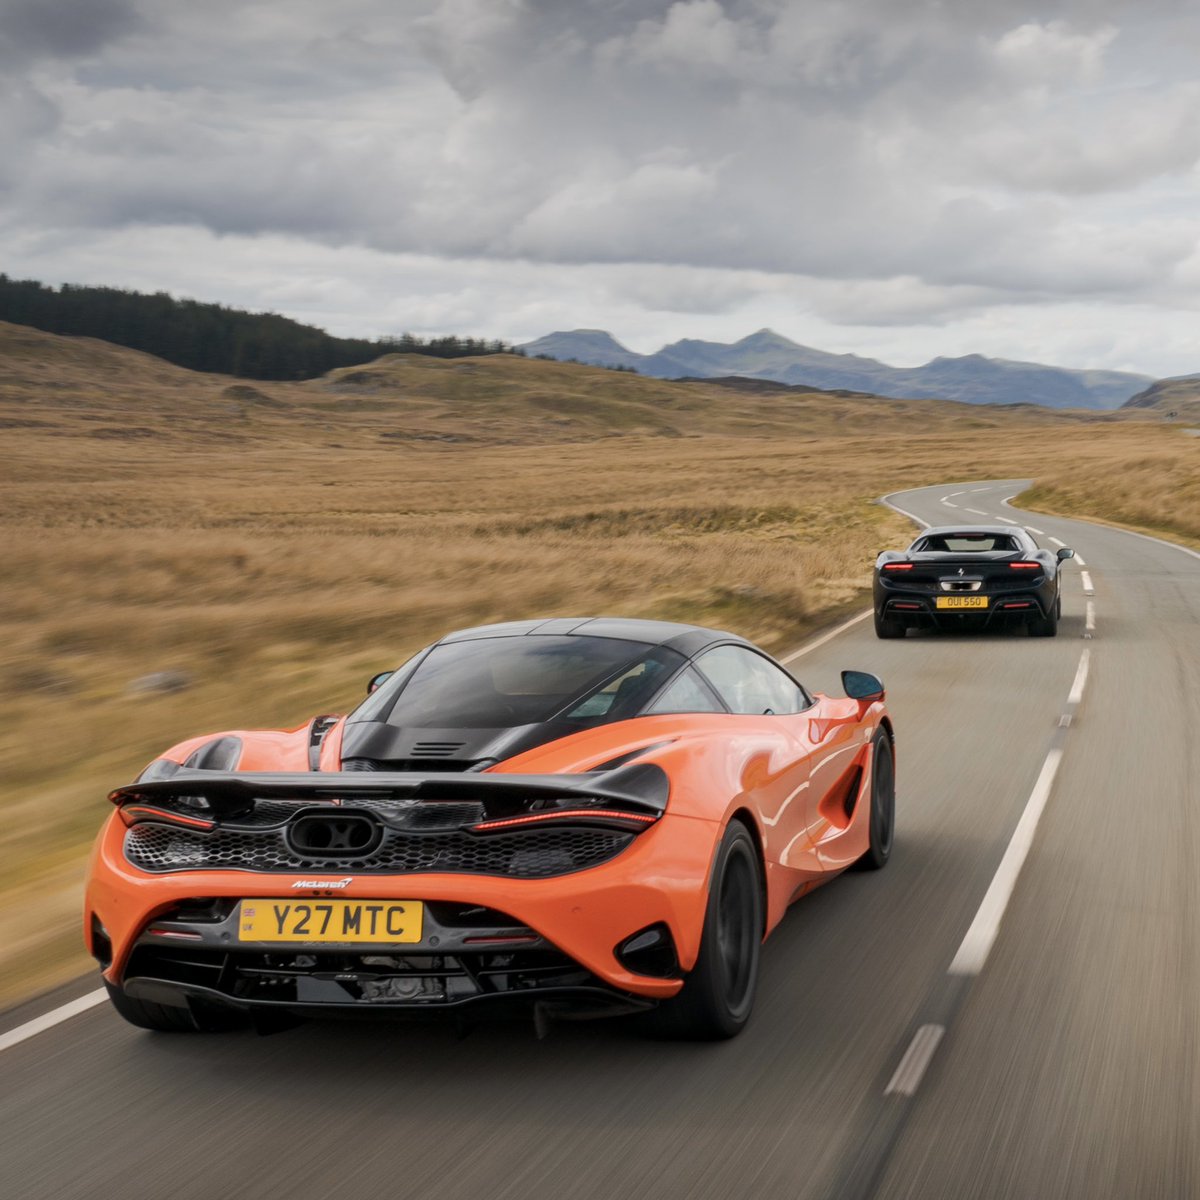 This week on The Intercooler podcast, Dan and Andrew discuss our recent McLaren 750S v Ferrari 296 GTB twin test – and why supercar buyers are shunning downsized V6 engines. Listen now on Apple Podcasts: podcasts.apple.com/gb/podcast/the… Or on Spotify: open.spotify.com/episode/2bc4s8…